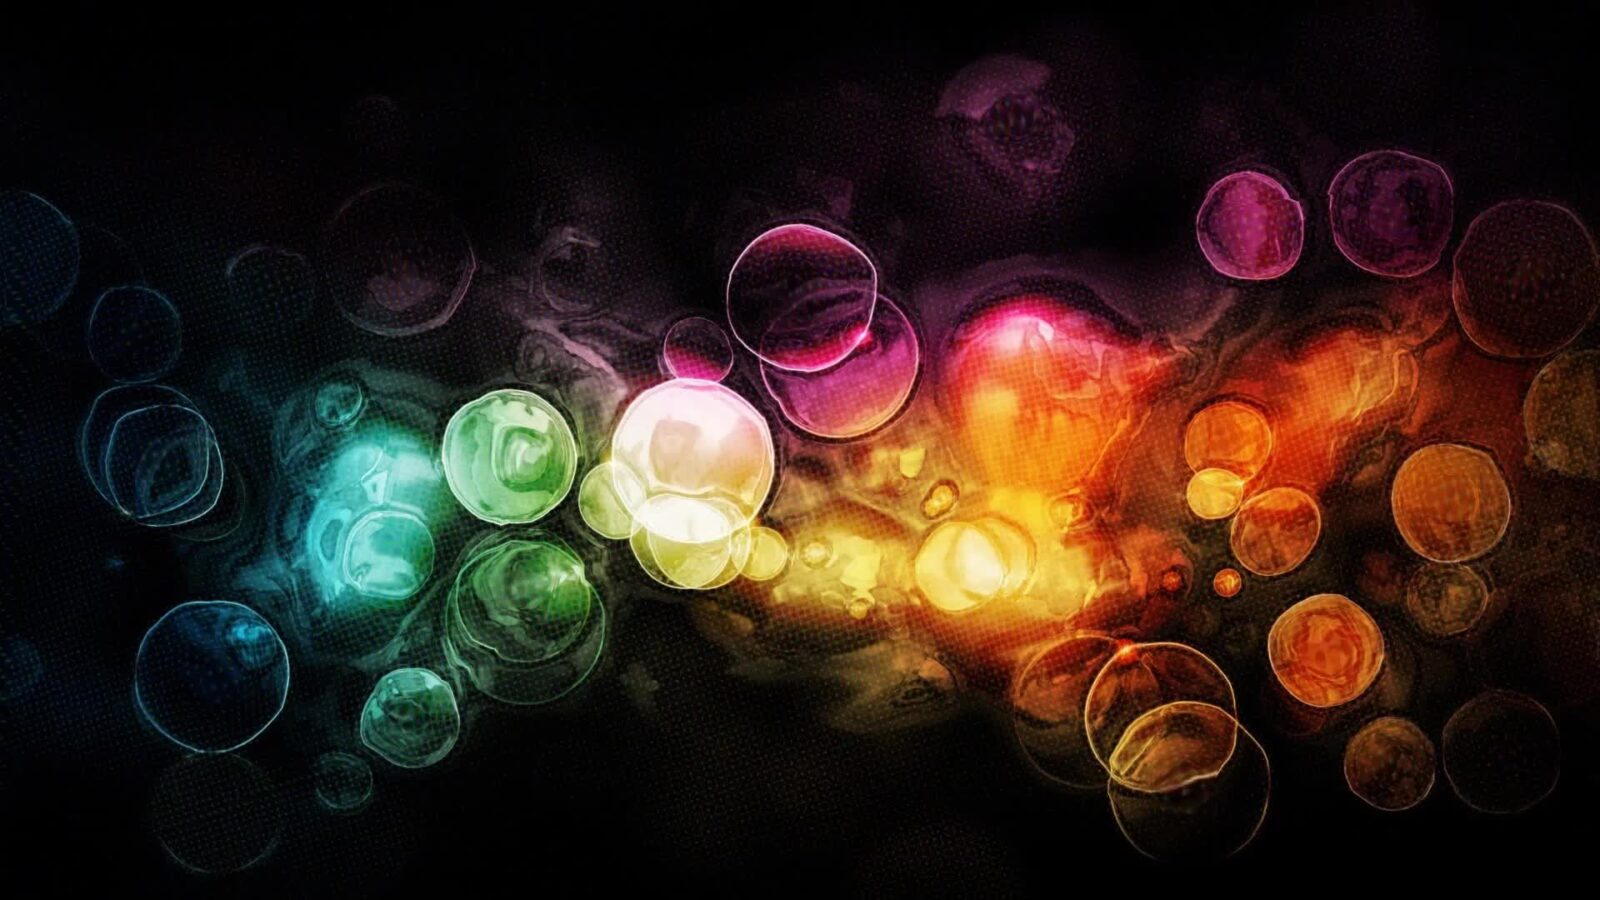 LiveWallpapers4Free.com | Abstract Balloon Bubbles - Free Live Wallpaper